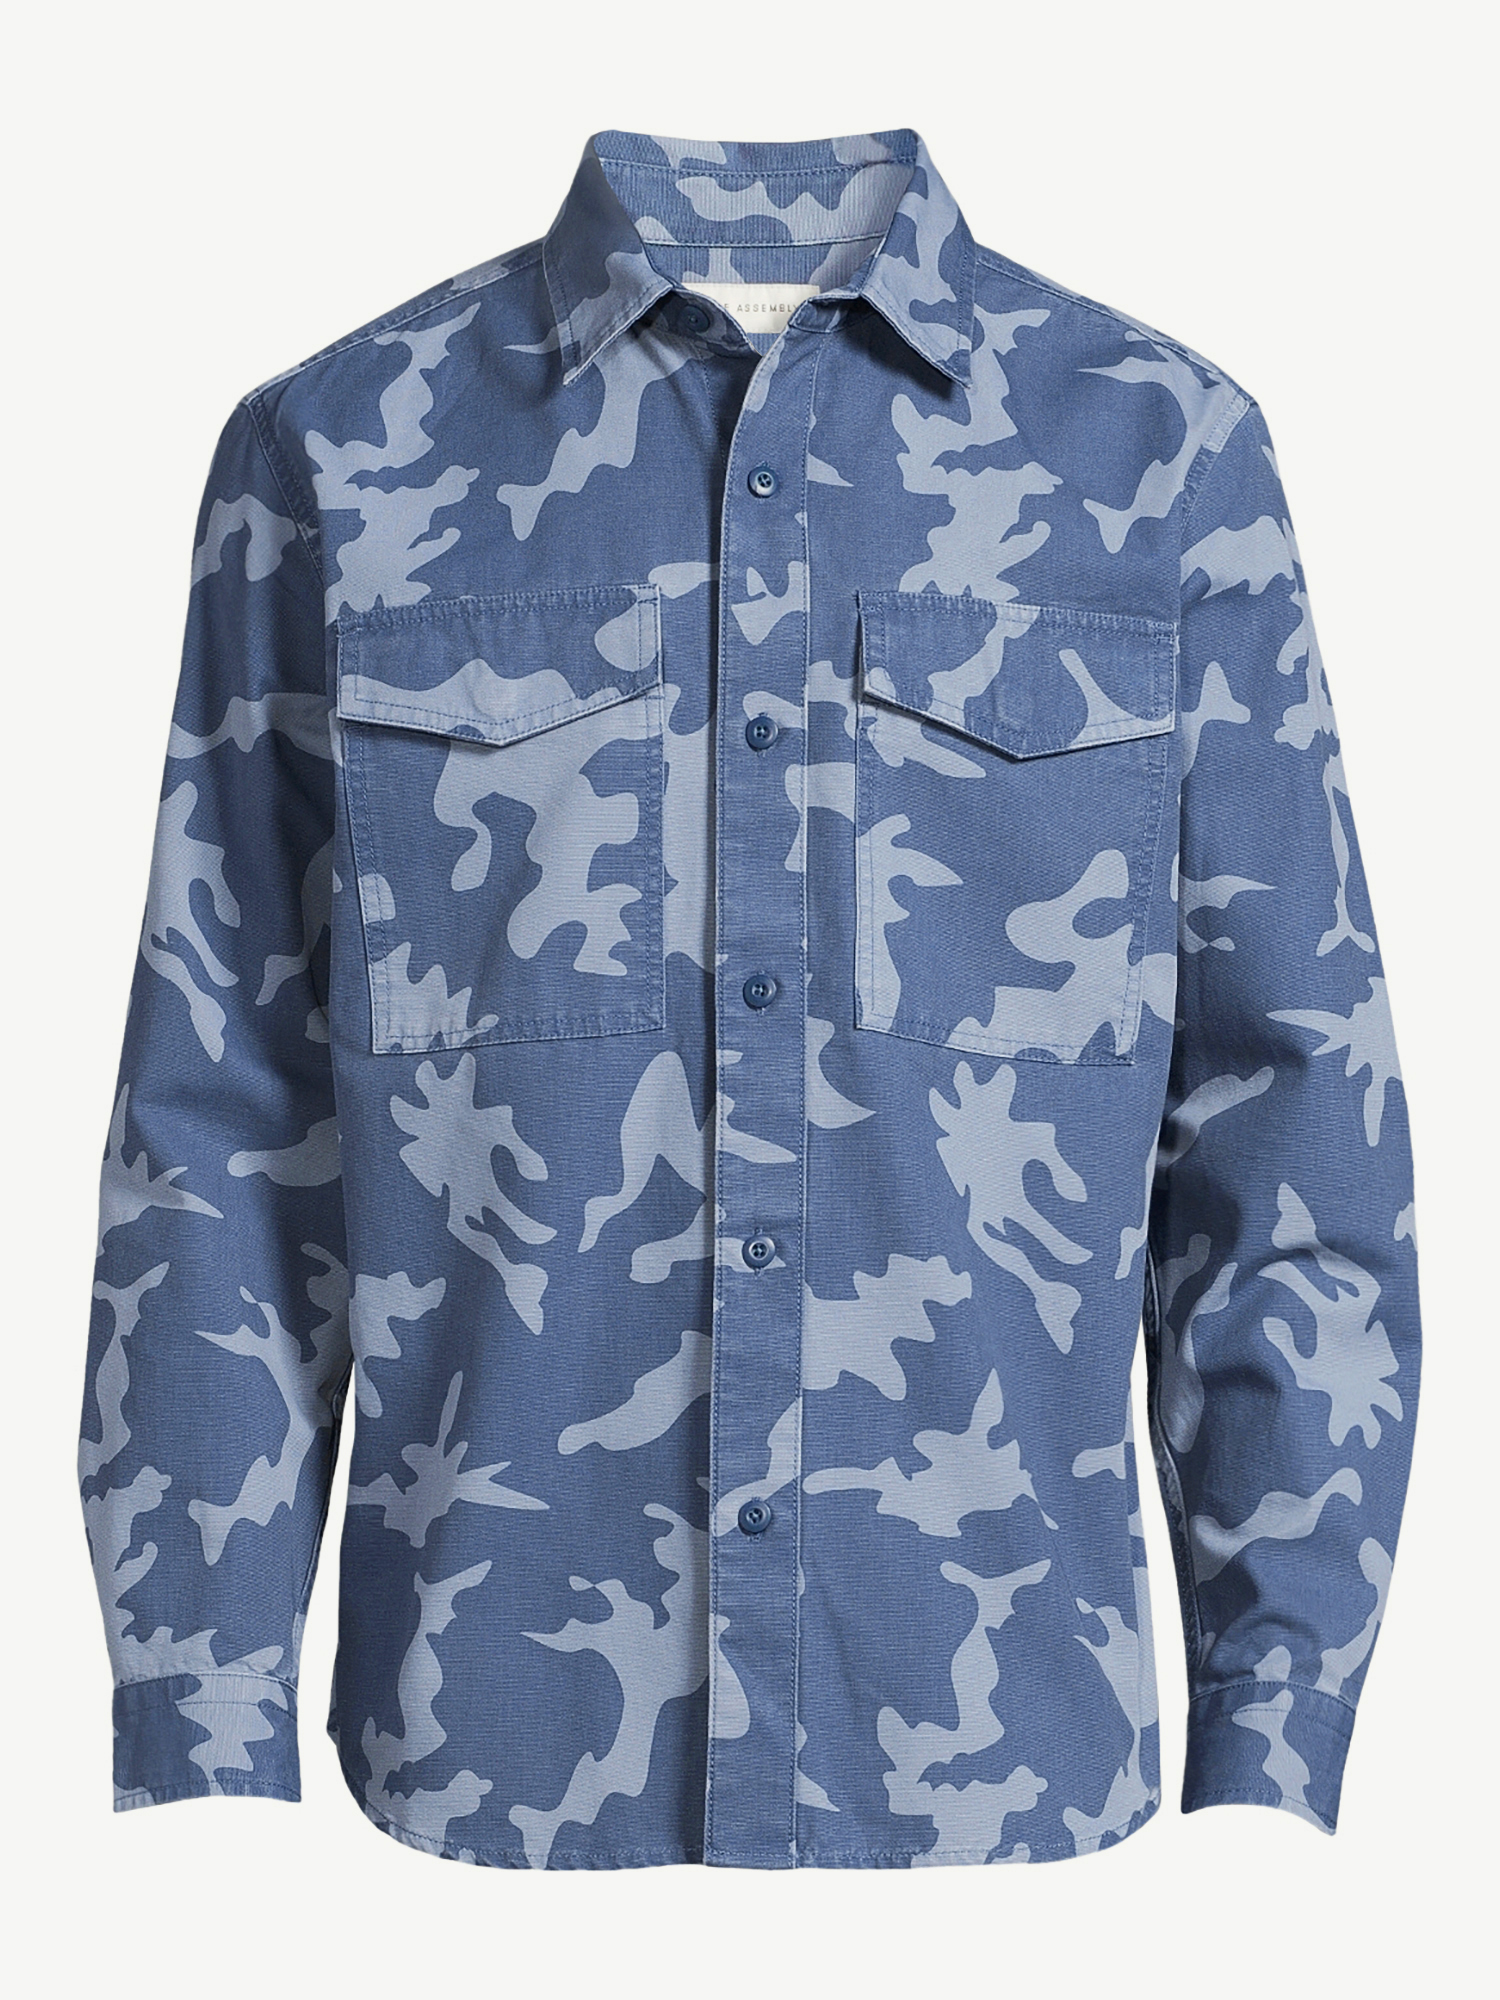 Free Assembly Men's Cotton Canvas Shirt Jacket - image 5 of 5